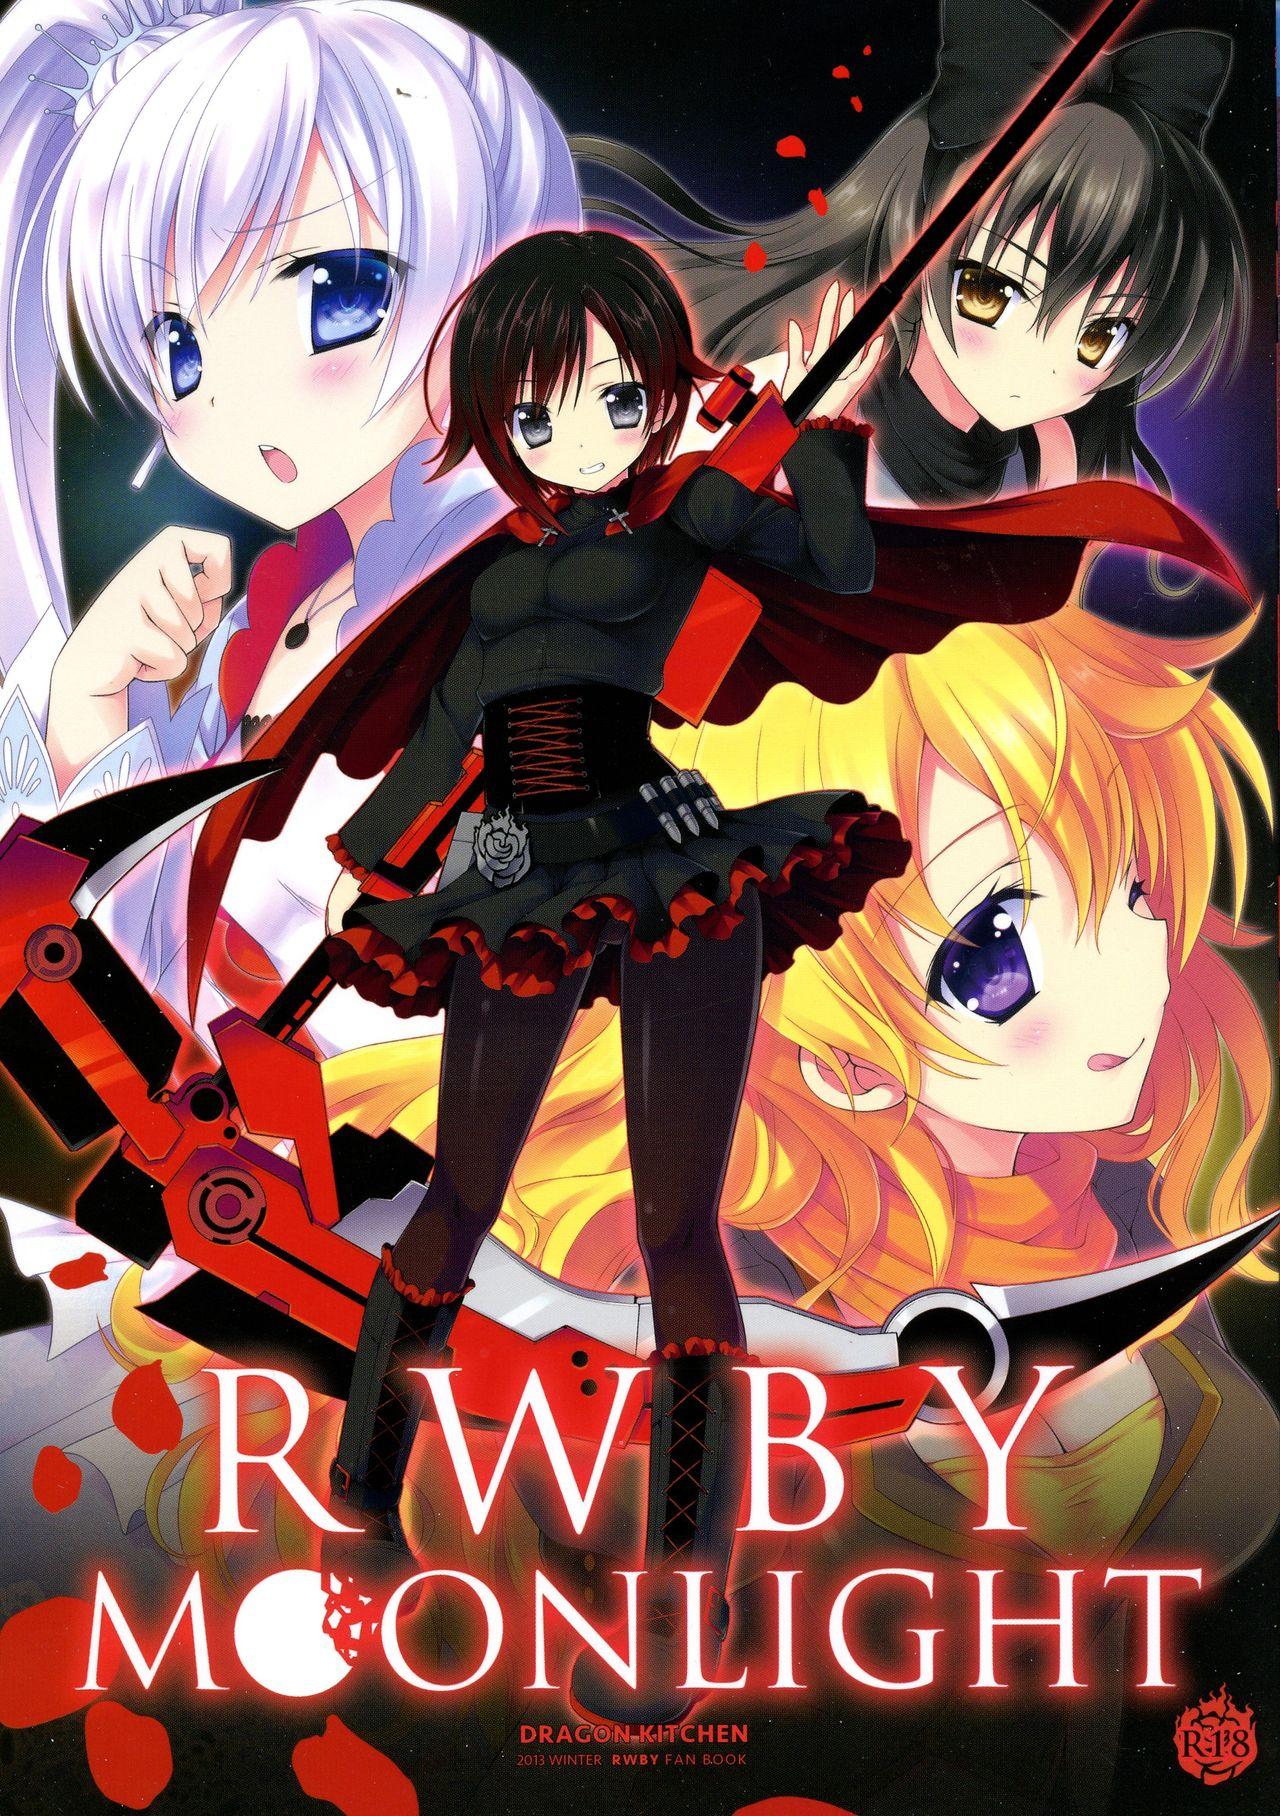 Argentina RWBY MOONLIGHT - Rwby Webcamshow - Picture 1